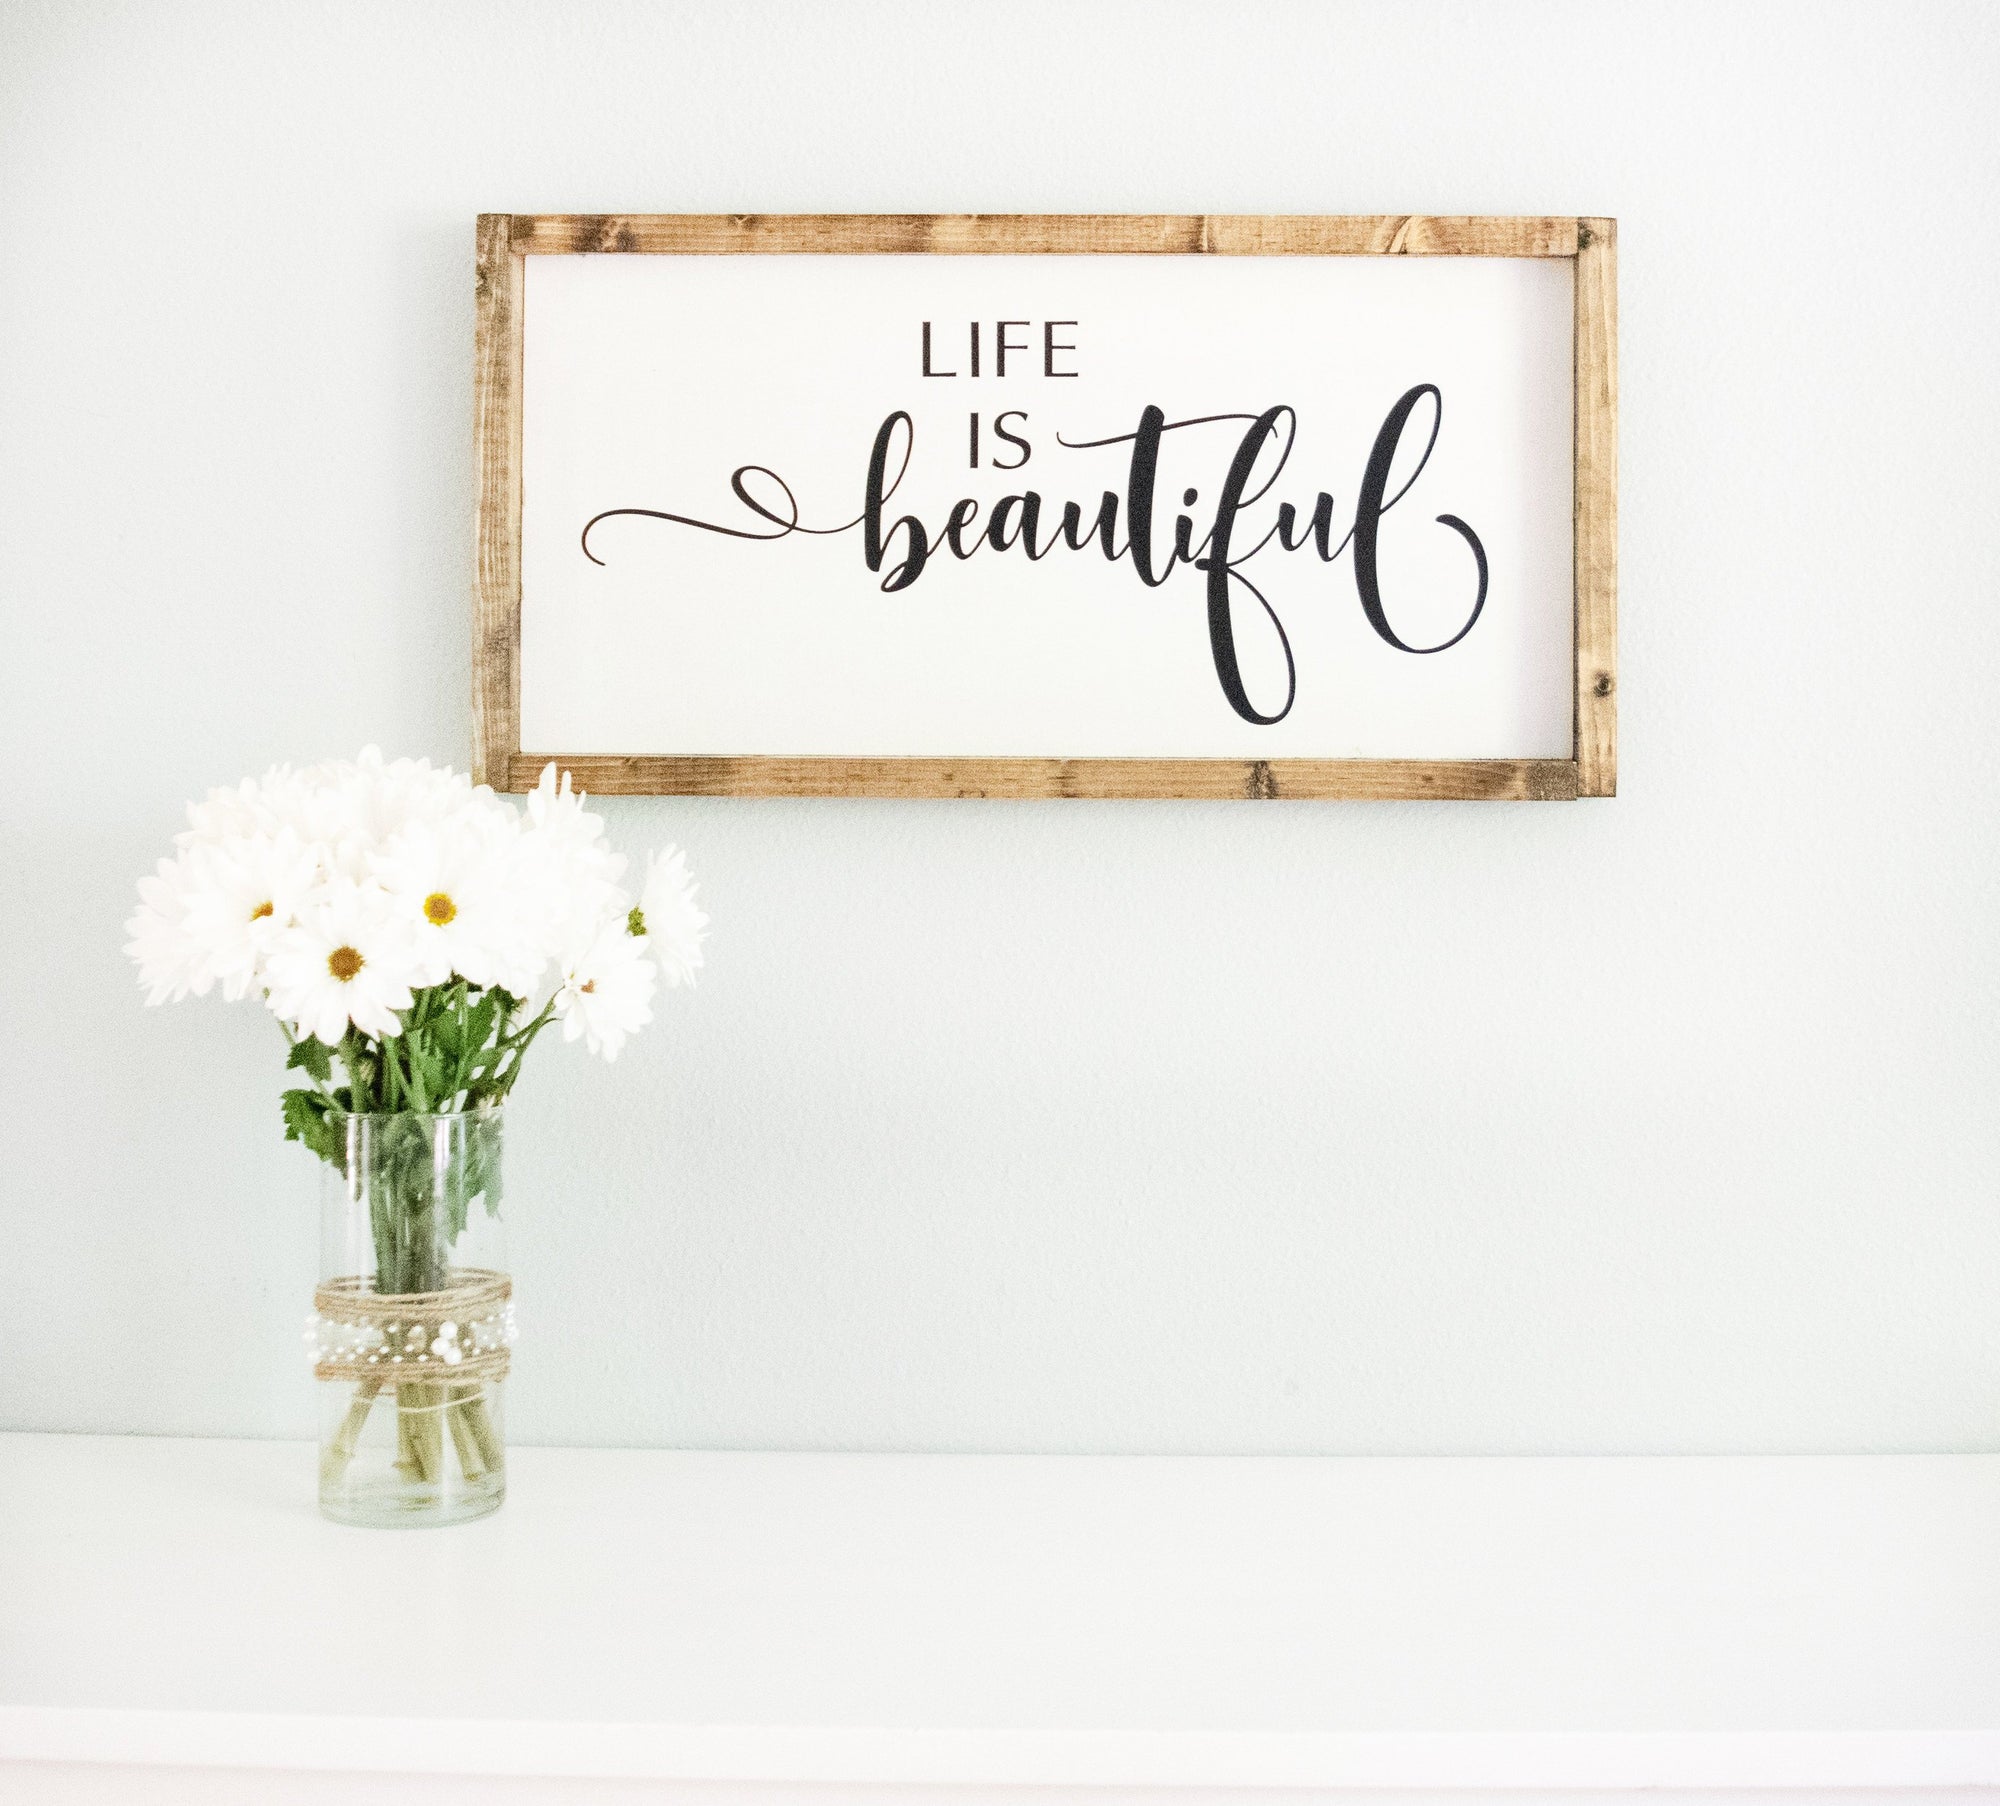 Life is Beautiful Wood Framed Painted Sign, home decor kitchen living room dining room, inspirational wonderful life gift Rustic Farmhouse